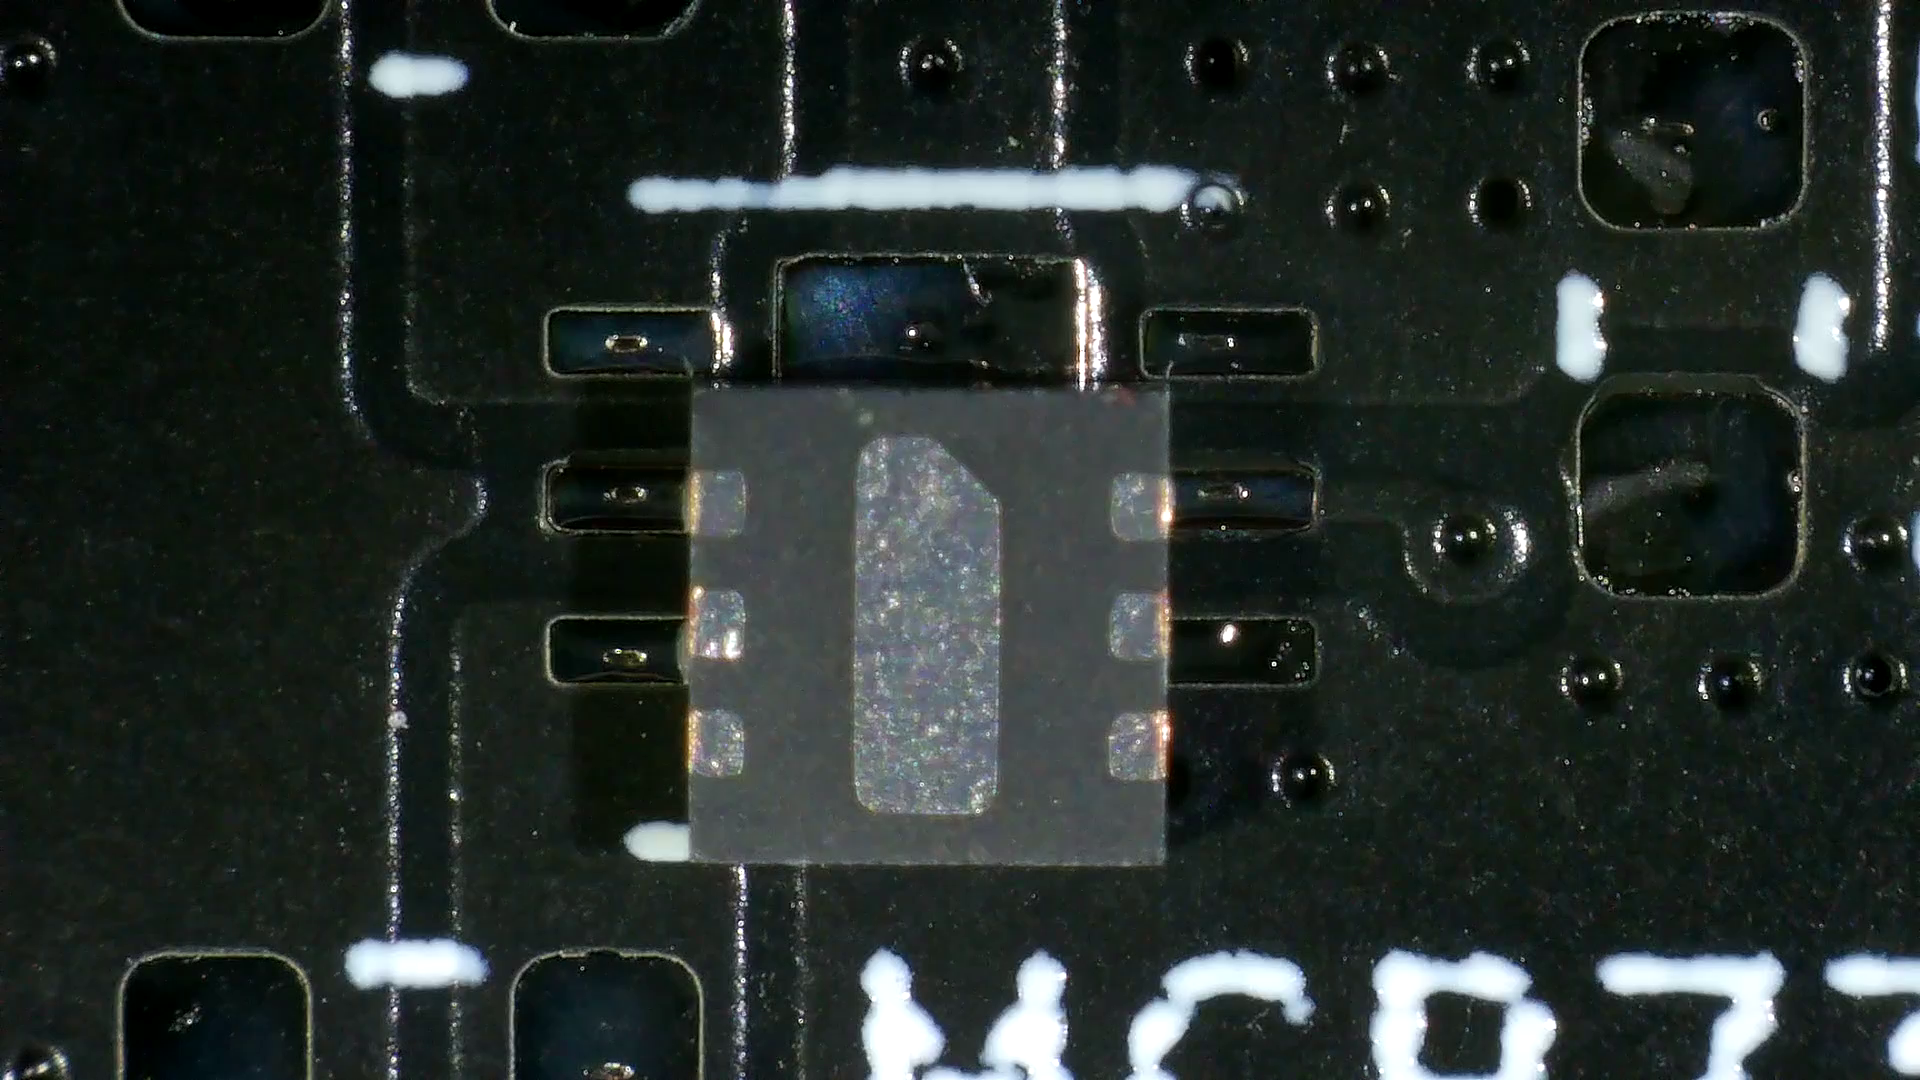 It's clear the IC would not make good contact with the pads as there are only about 100 micron or so overlap between inner edge of the pad and outer edge of the IC's contacts. The thermal pad is also way to big and close to the IC's contacts.